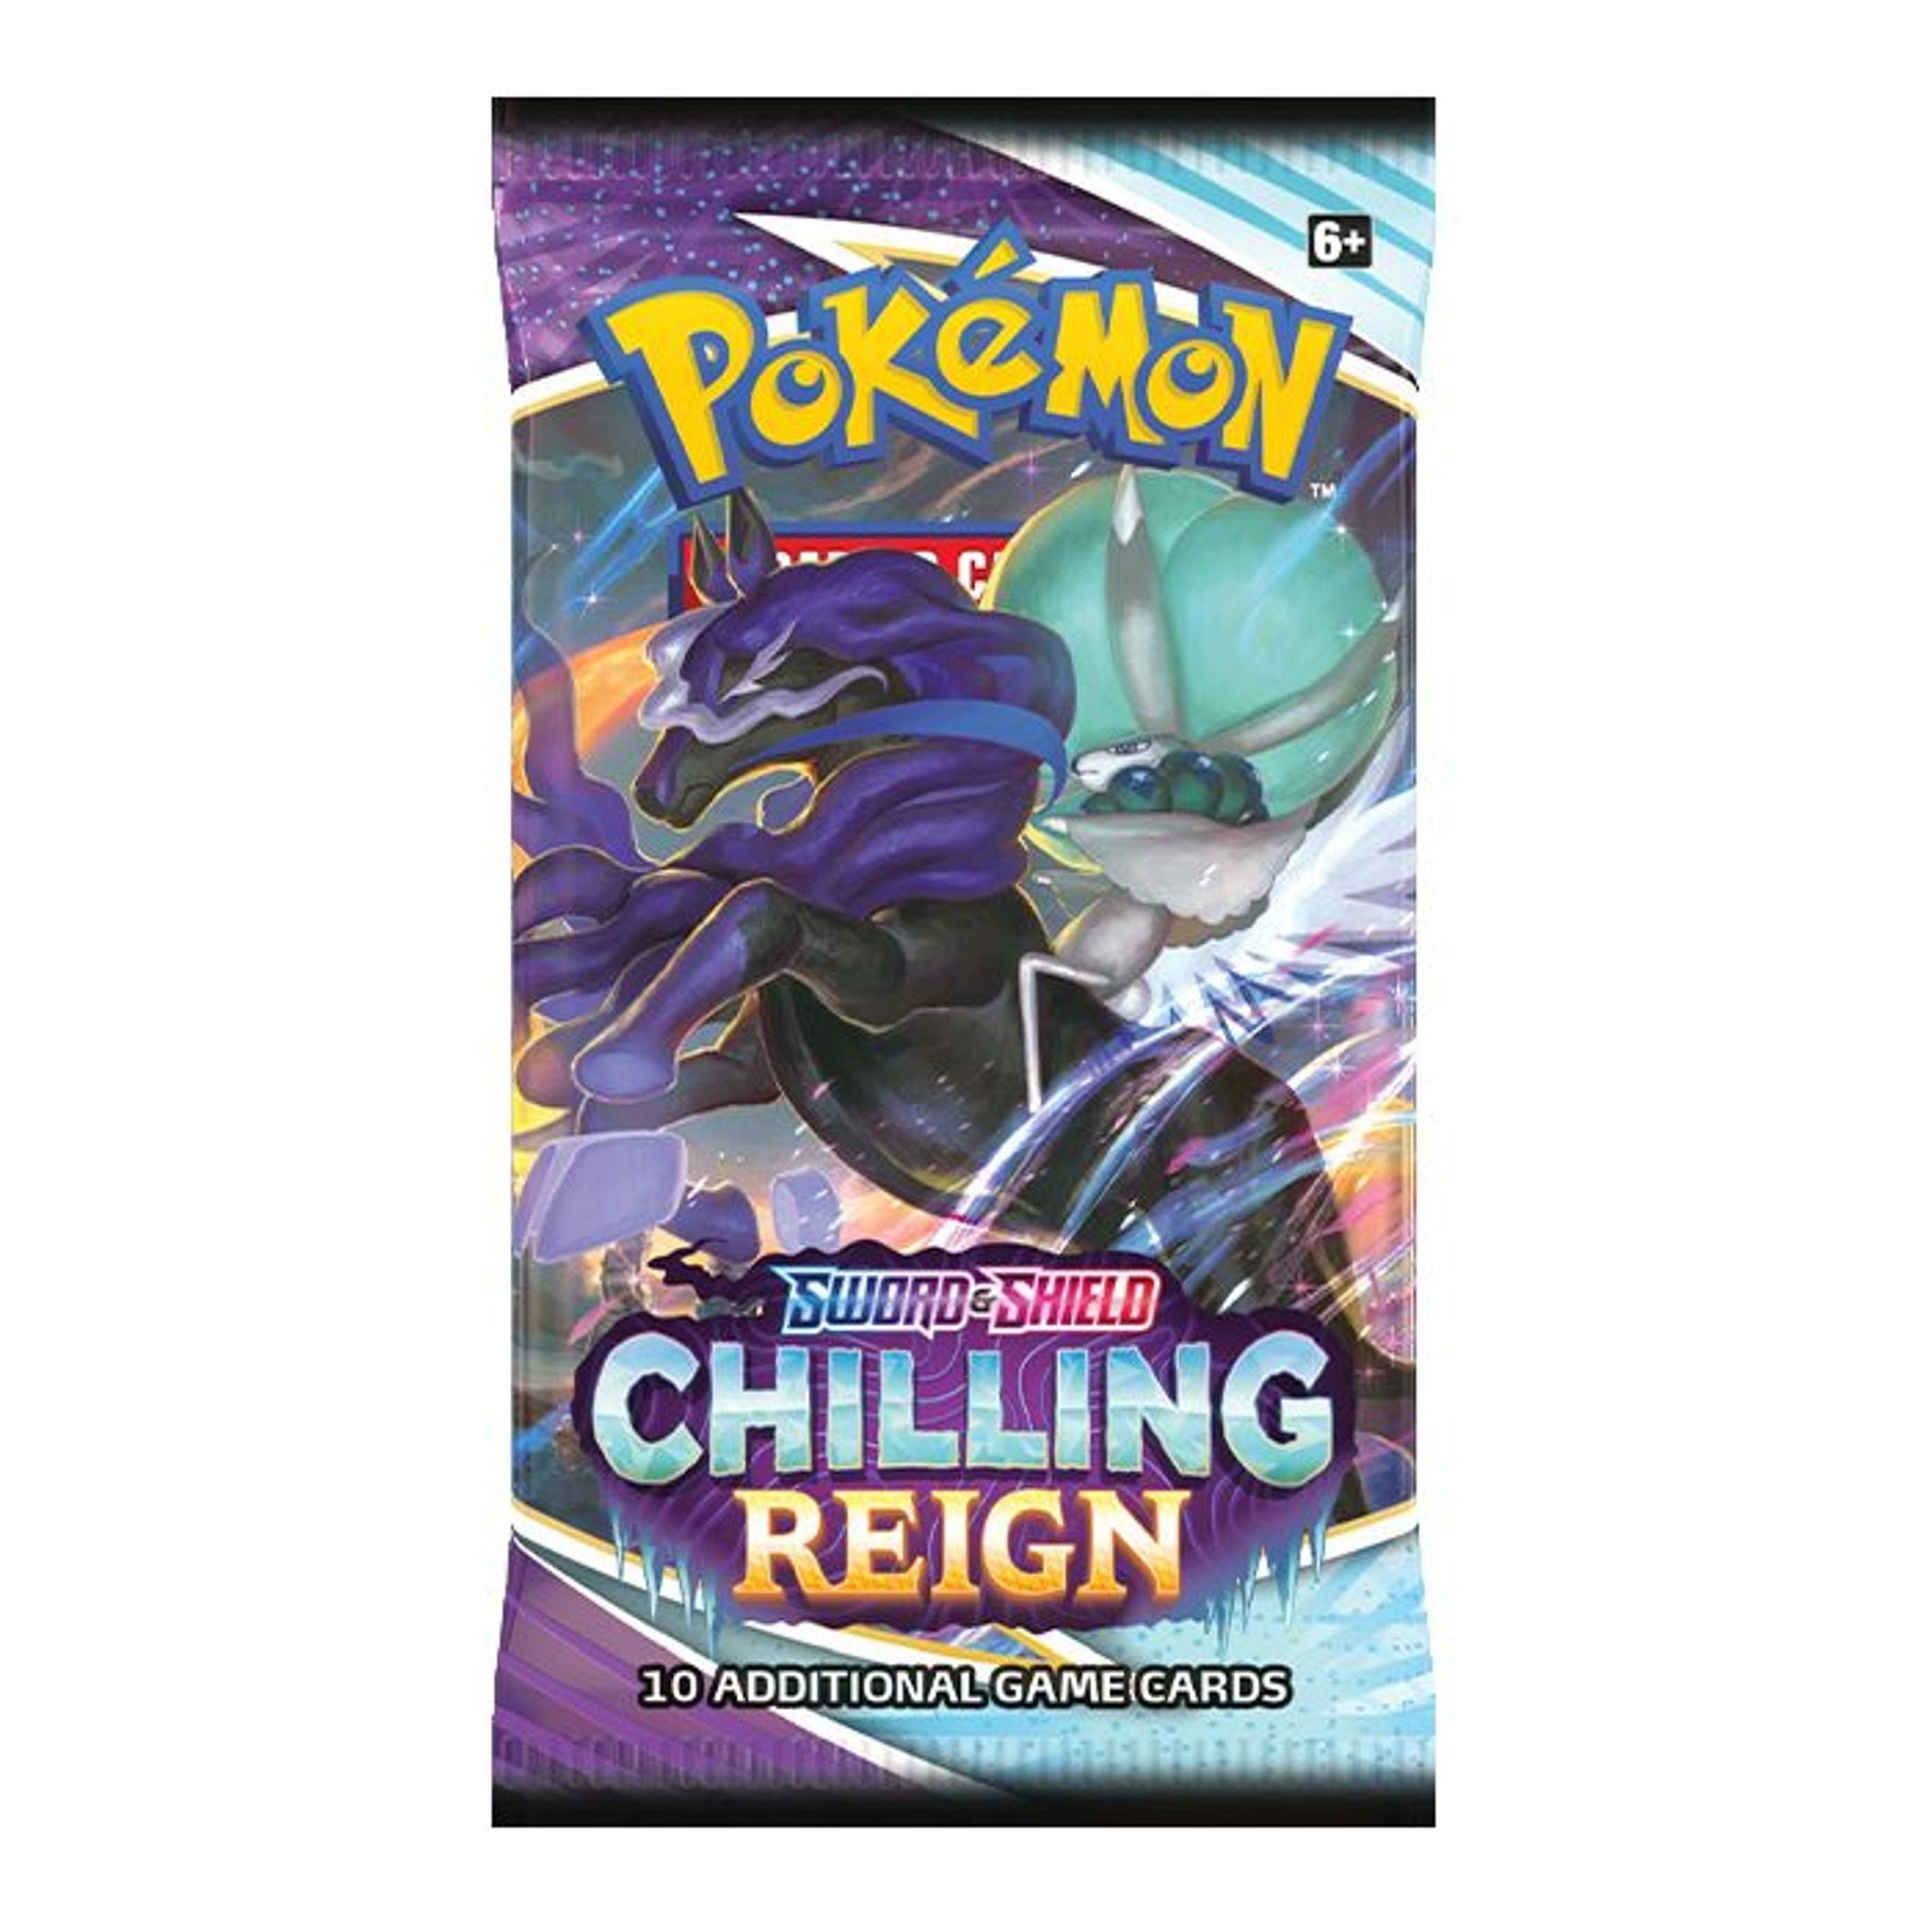 POKEMON - CHILLING REIGN - BOOSTER PACK